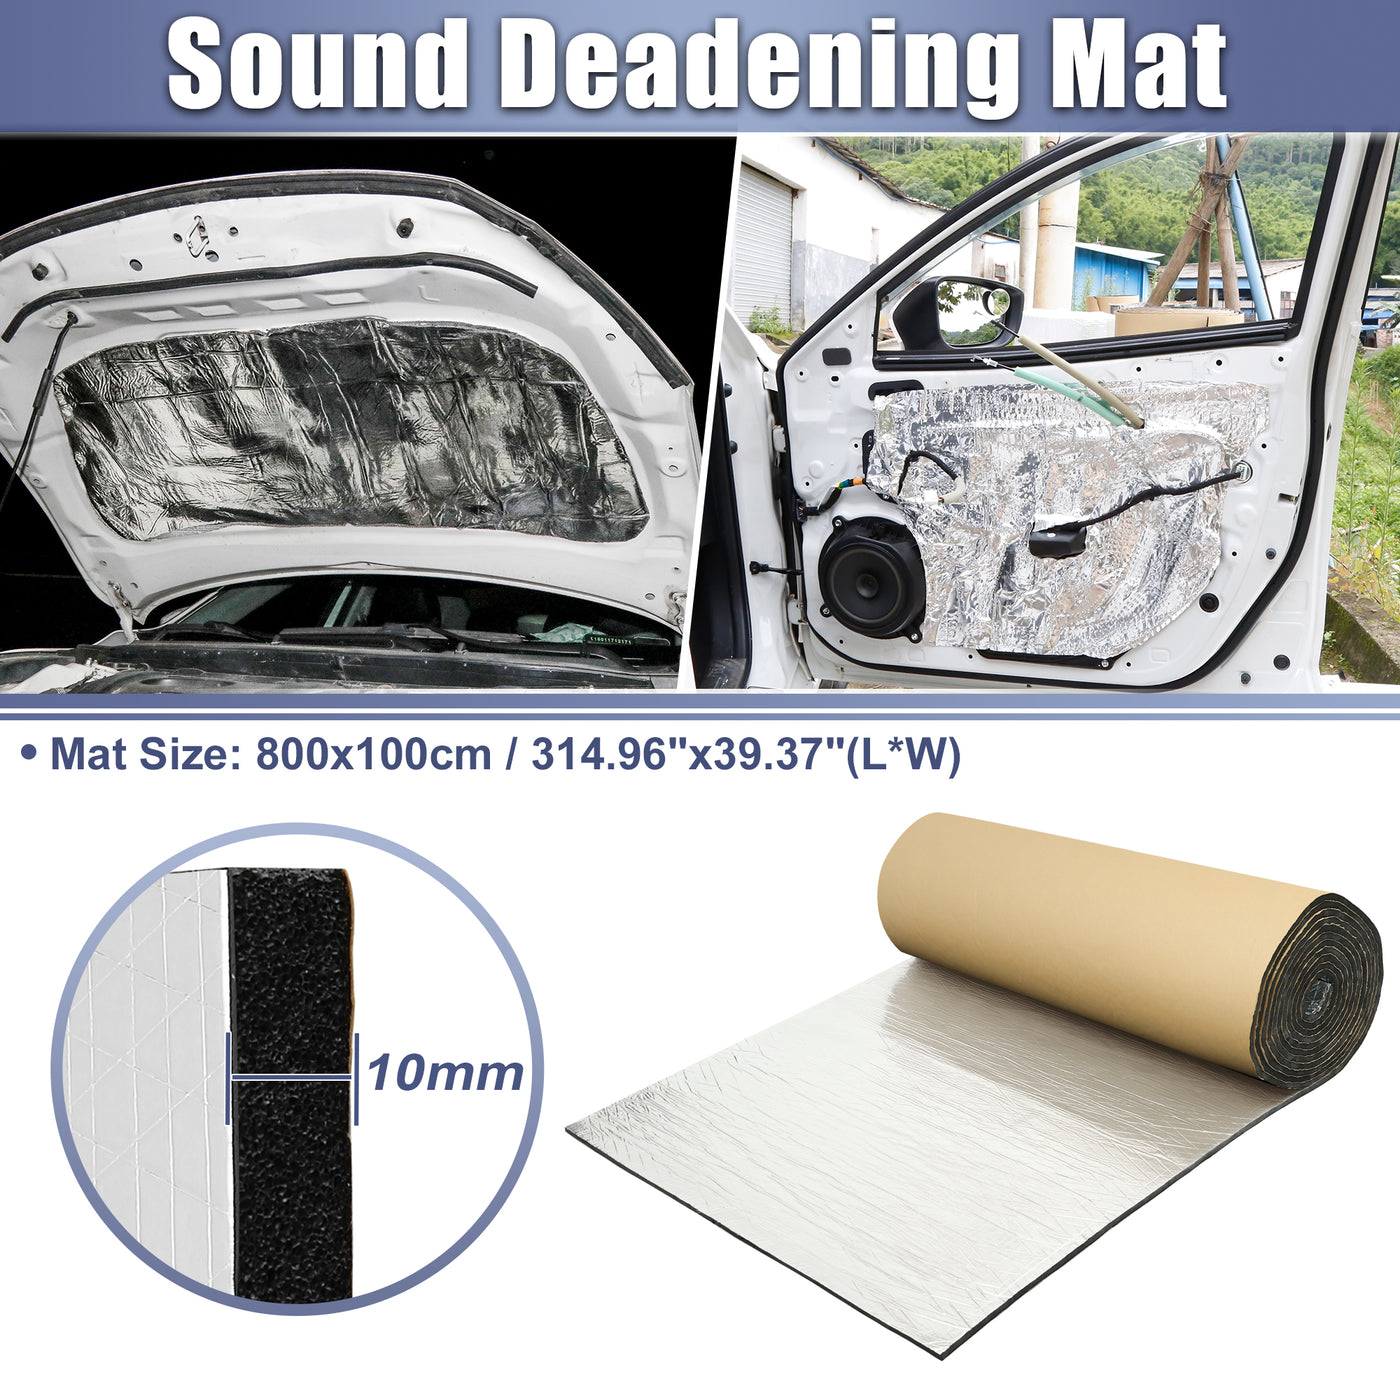 X AUTOHAUX 394mil 10mm 86.11sqft Car Sound Deadening Mat Aluminum Foil Closed Cell Foam Heat Shield Material Self Adhesive Universal for Hood Fender and Boat Engine Cover 314.96"x39.37"